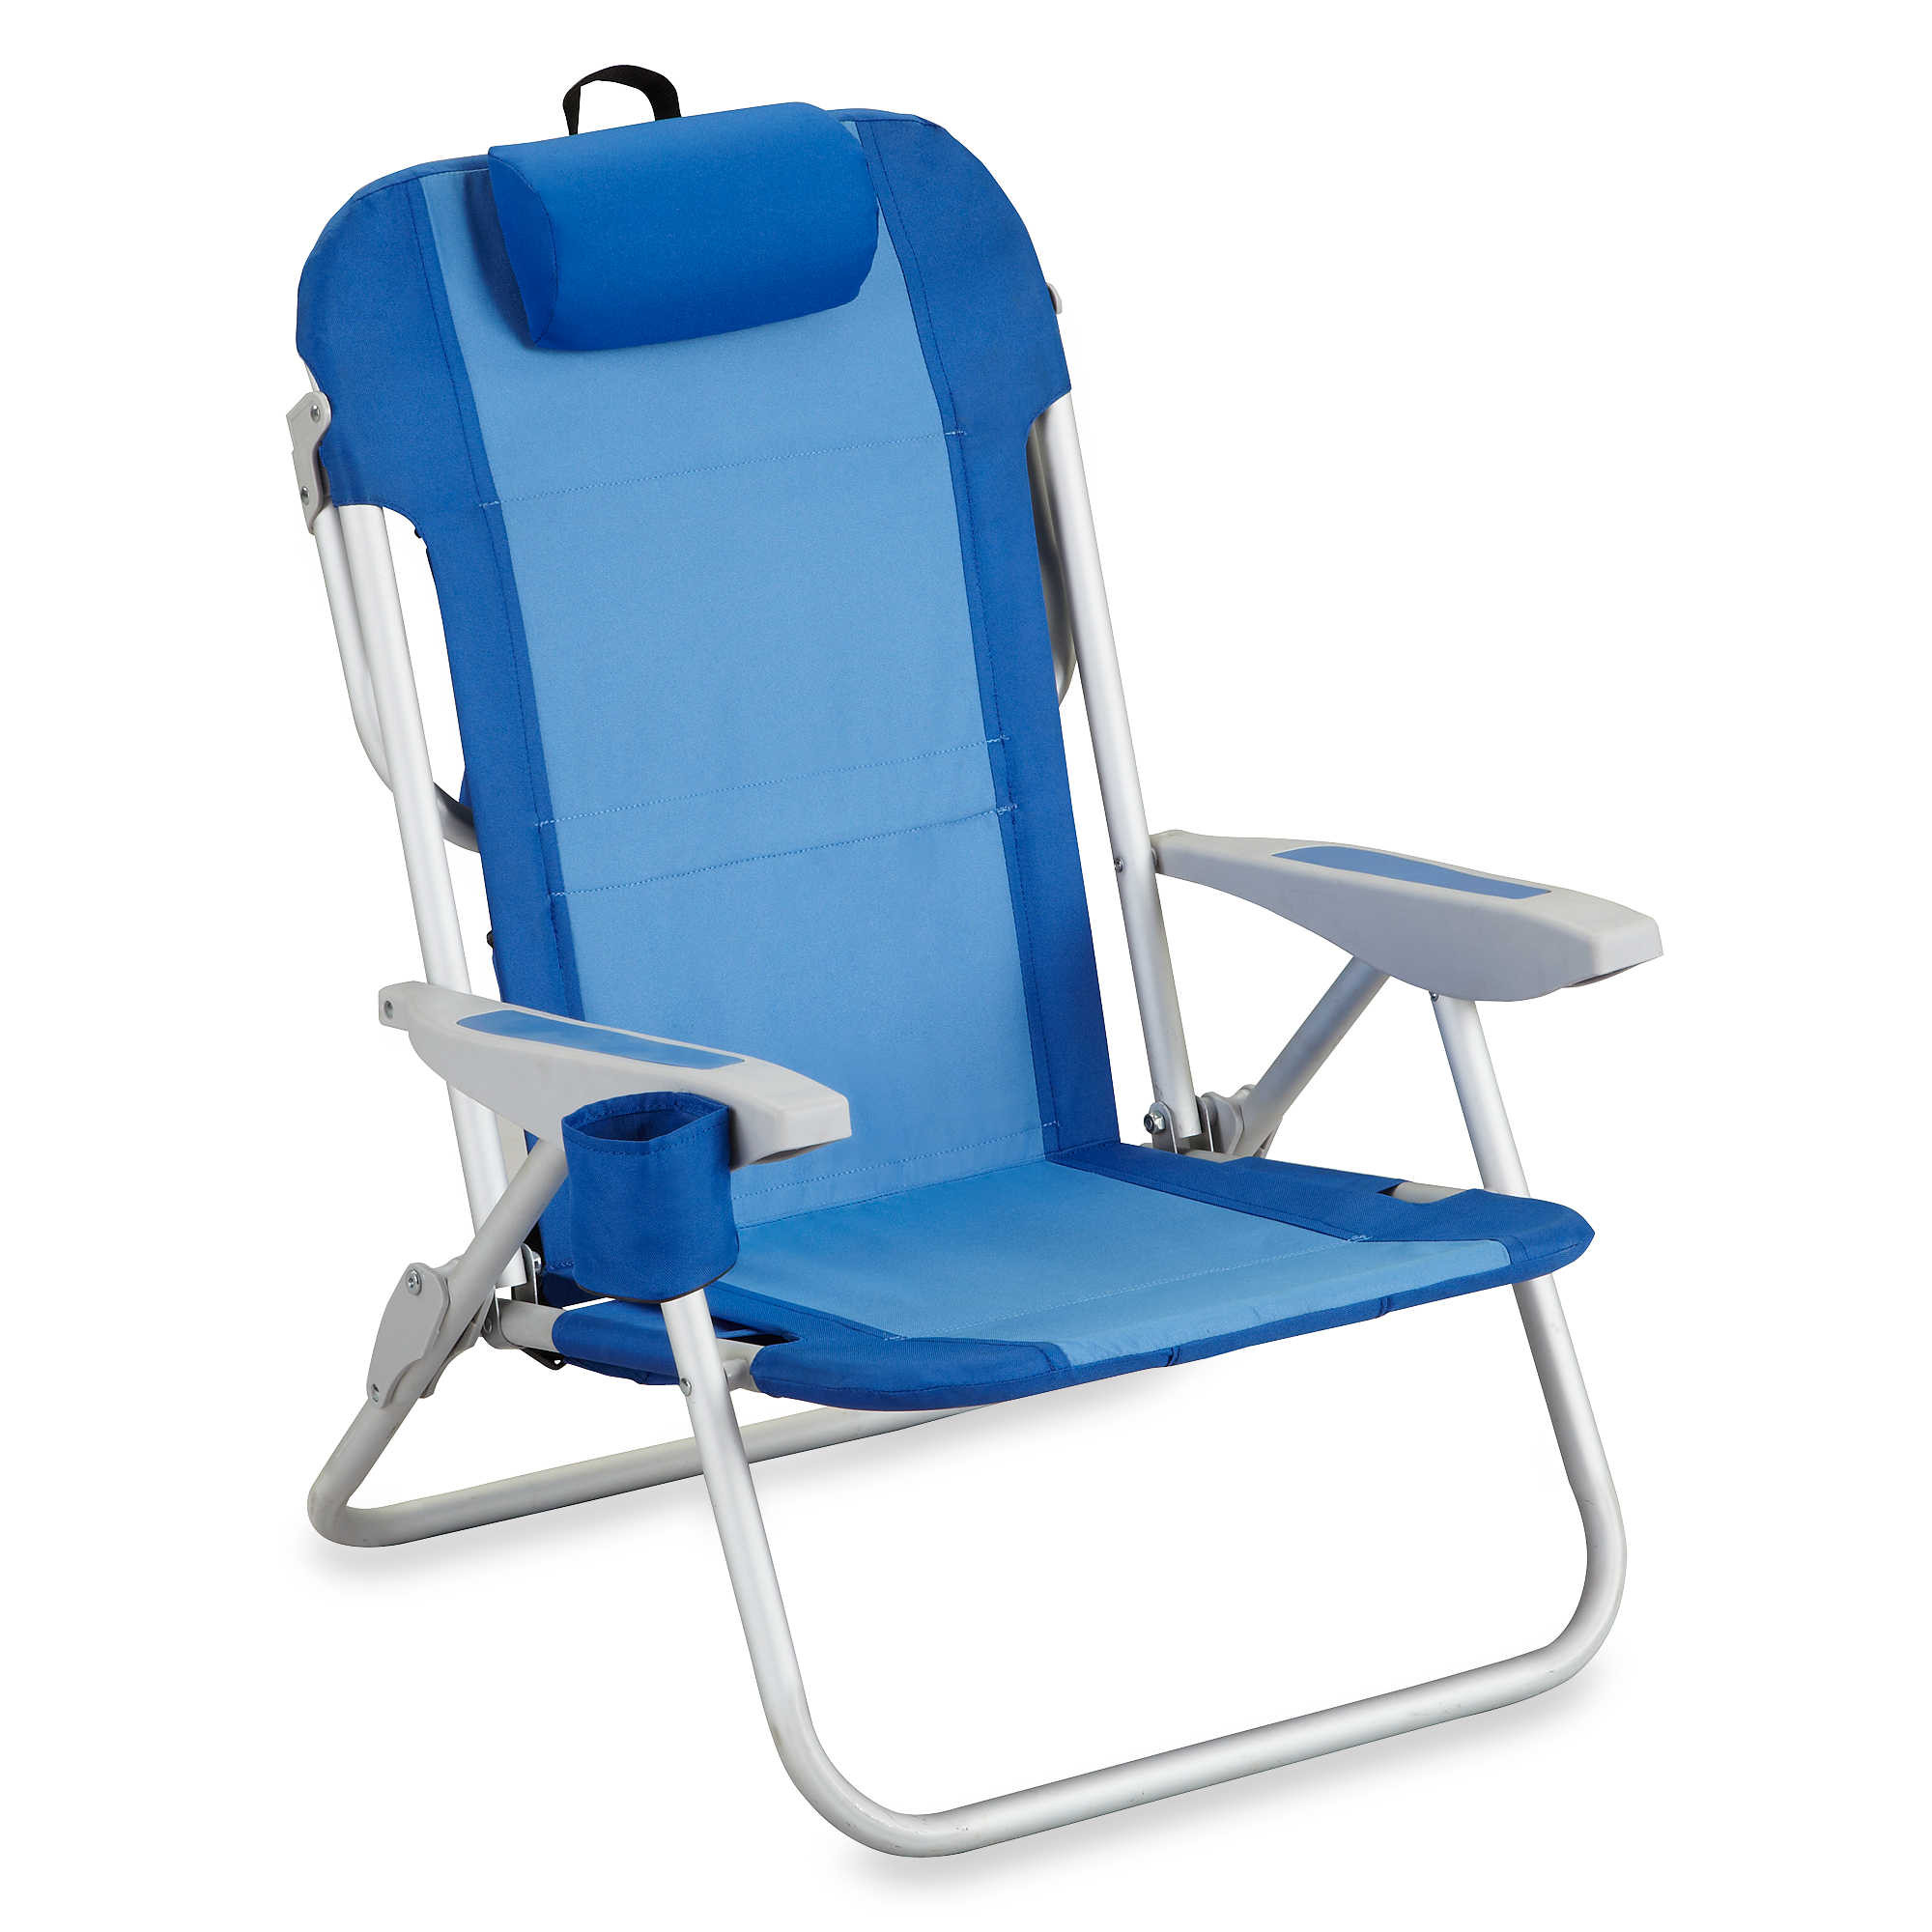 Beach Chairs: Seven Things to Know Before You Buy | Bed Bath & Beyond